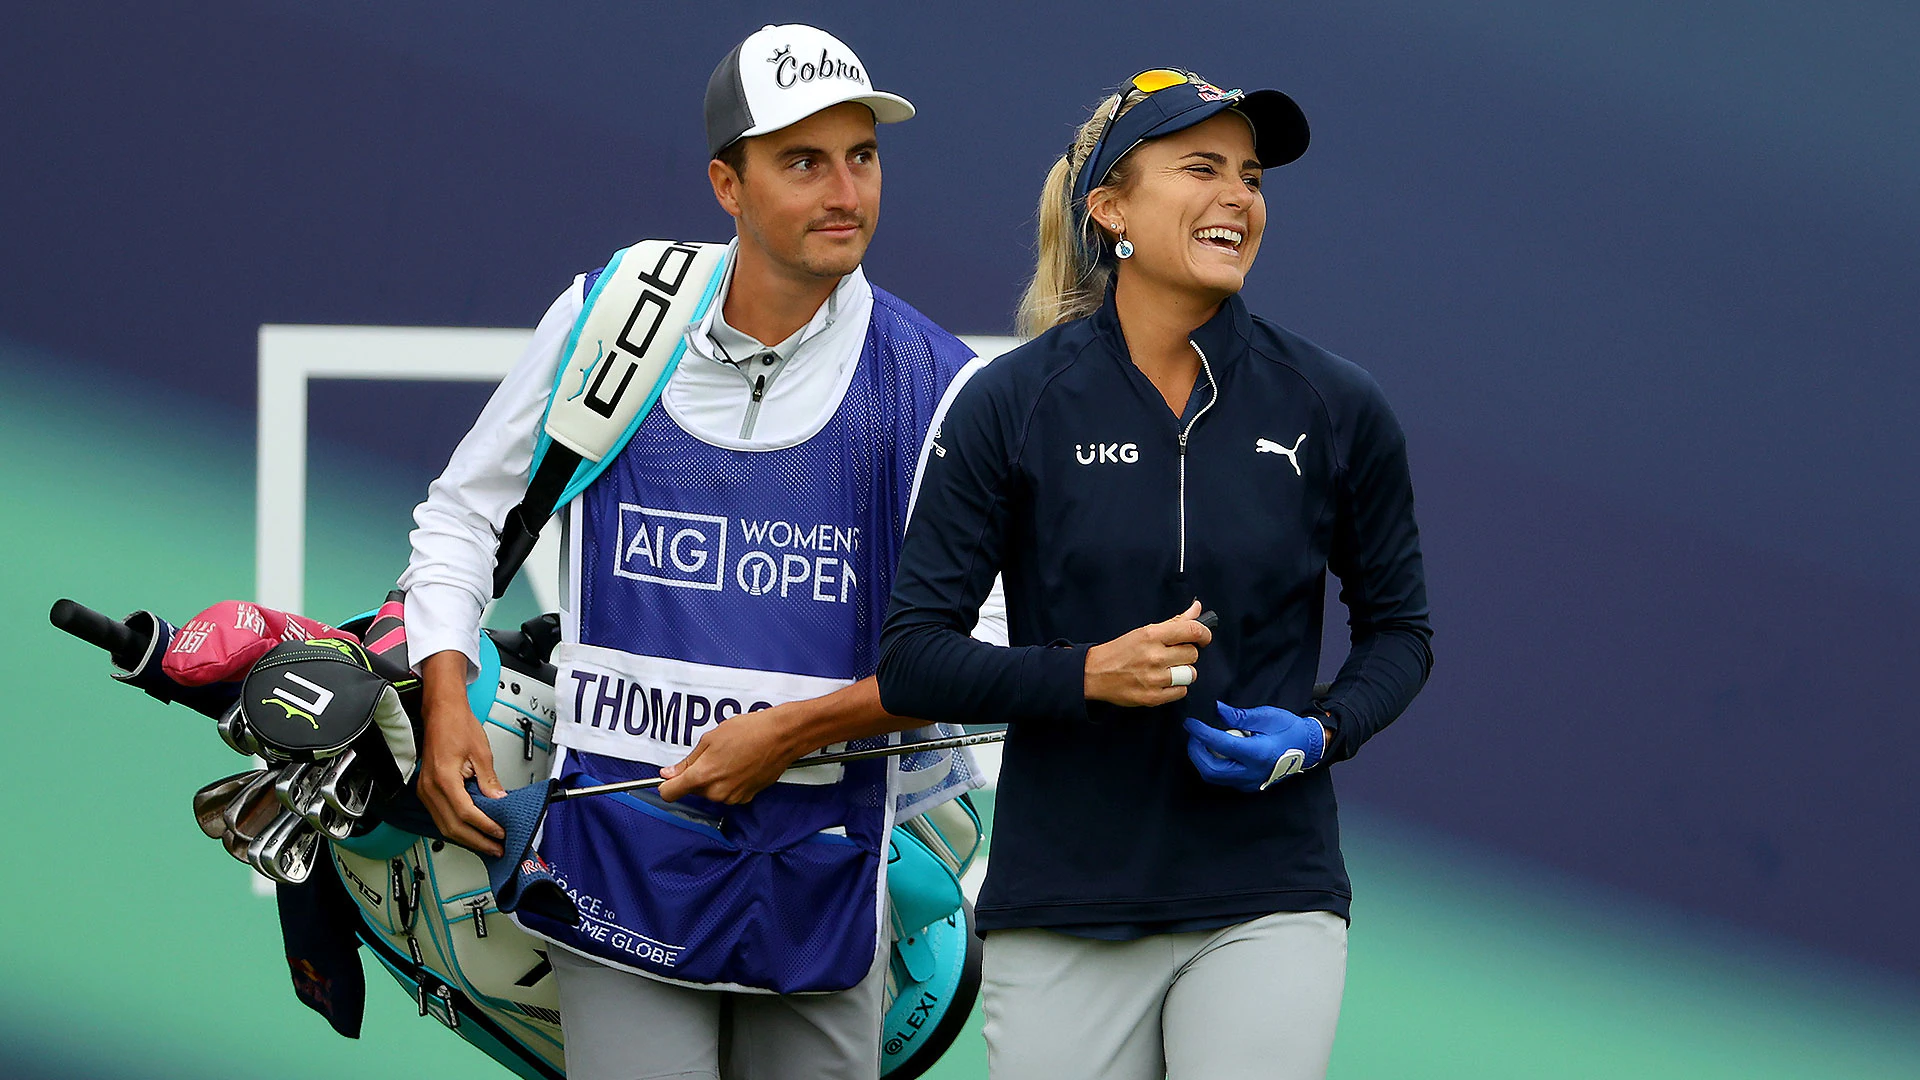 Using Carnoustie caddie, Lexi Thompson in contention at AIG Women’s Open